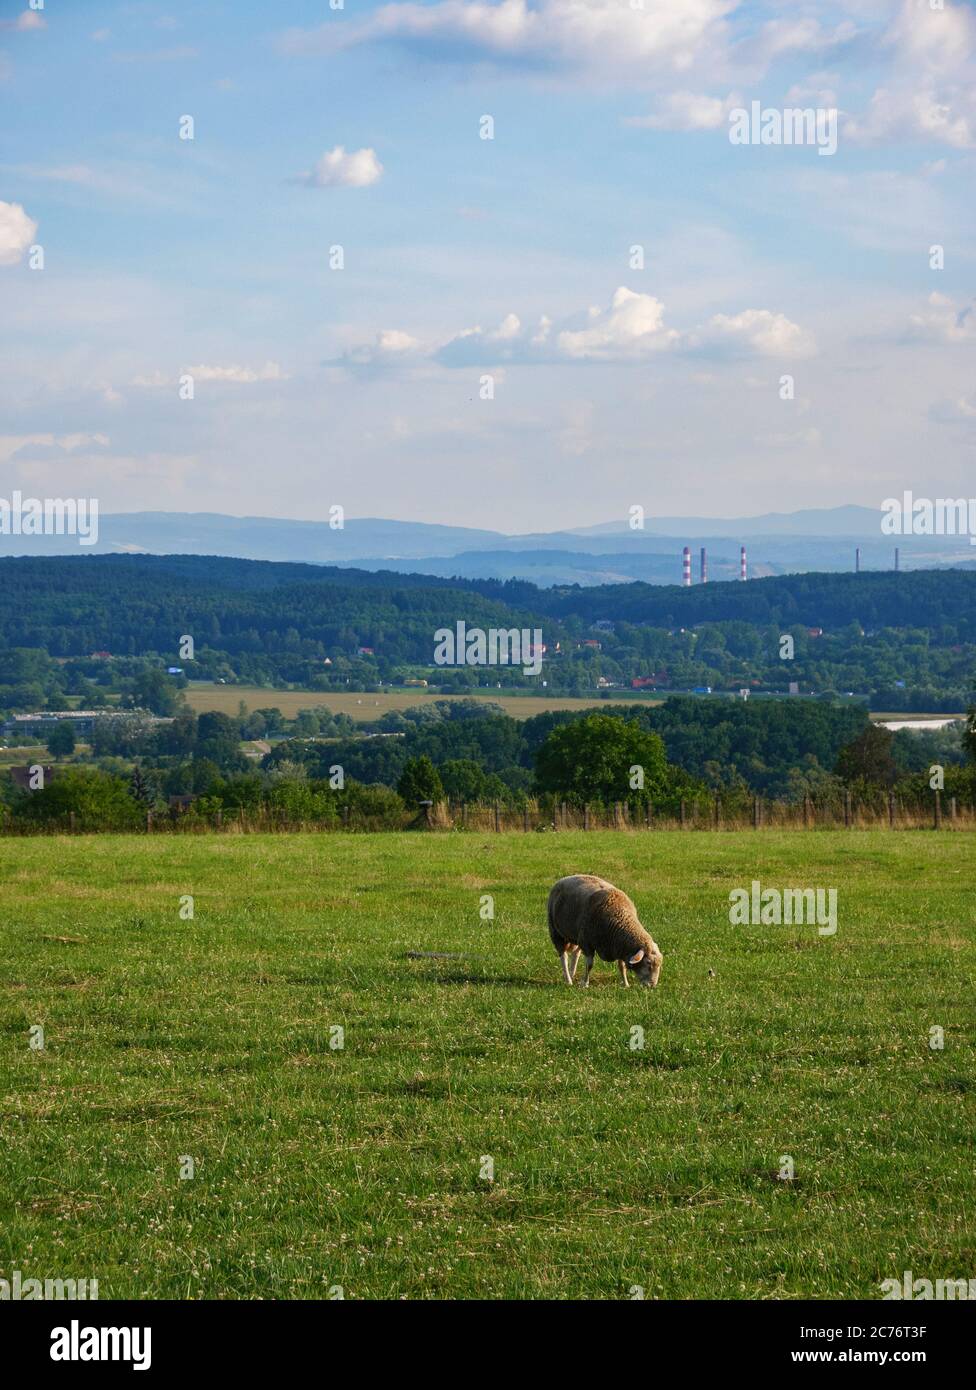 Sheep grazing grass in a meadow Stock Photo